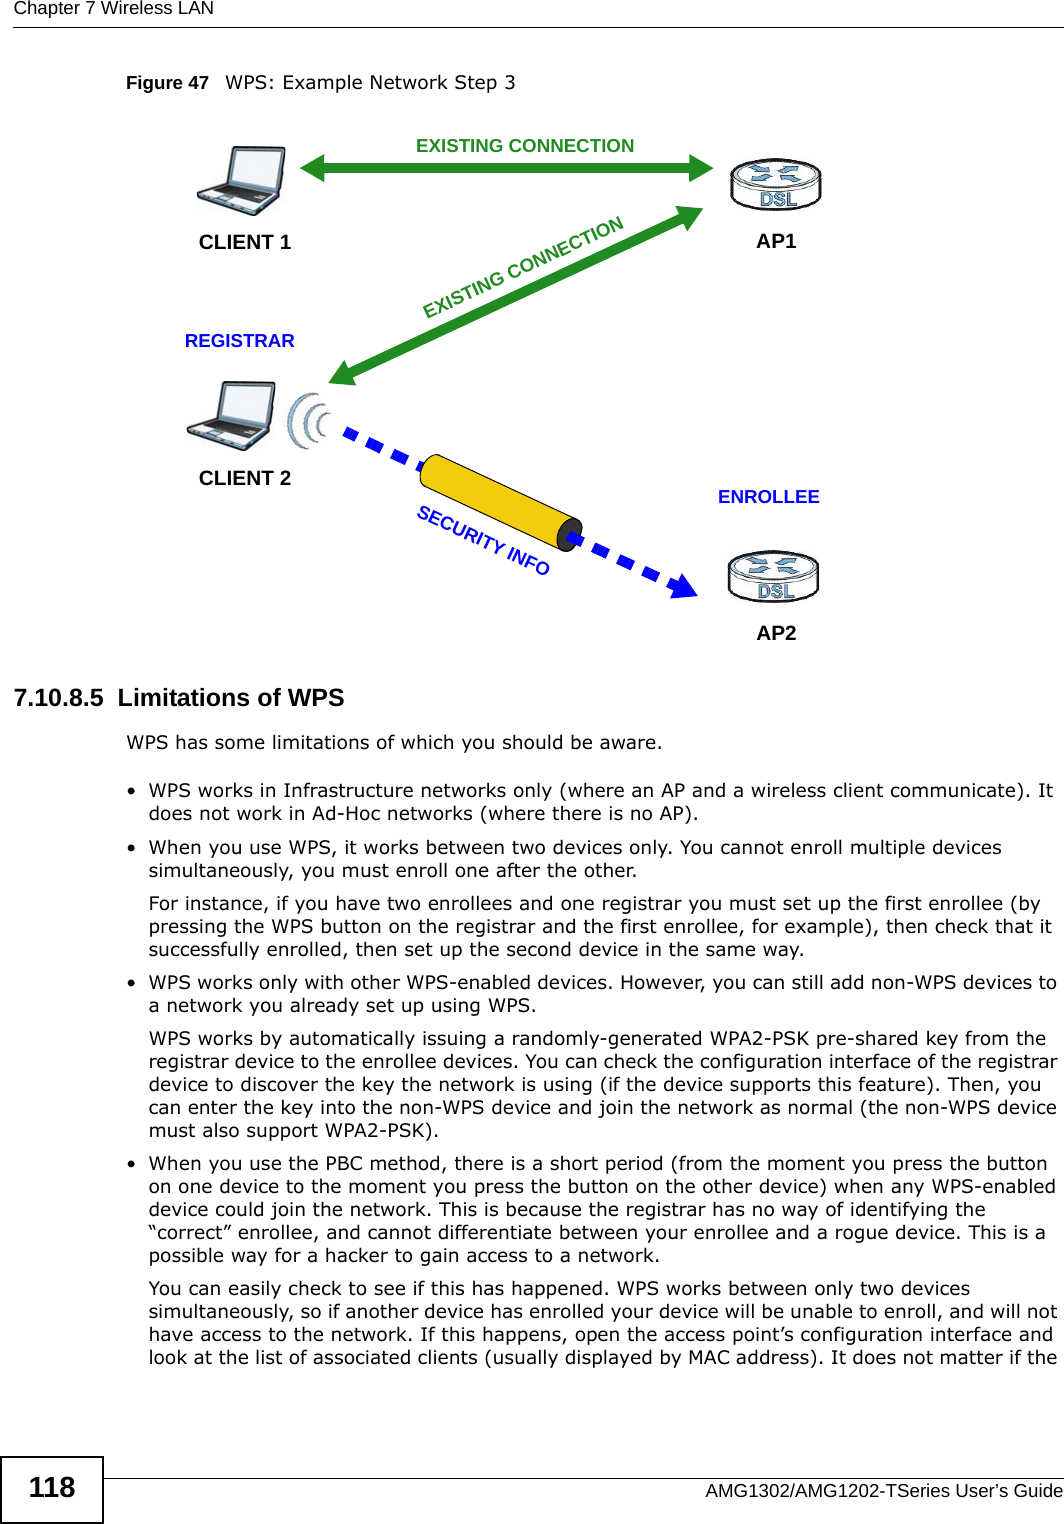 Chapter 7 Wireless LANAMG1302/AMG1202-TSeries User’s Guide118Figure 47   WPS: Example Network Step 37.10.8.5  Limitations of WPSWPS has some limitations of which you should be aware. • WPS works in Infrastructure networks only (where an AP and a wireless client communicate). It does not work in Ad-Hoc networks (where there is no AP).• When you use WPS, it works between two devices only. You cannot enroll multiple devices simultaneously, you must enroll one after the other. For instance, if you have two enrollees and one registrar you must set up the first enrollee (by pressing the WPS button on the registrar and the first enrollee, for example), then check that it successfully enrolled, then set up the second device in the same way.• WPS works only with other WPS-enabled devices. However, you can still add non-WPS devices to a network you already set up using WPS. WPS works by automatically issuing a randomly-generated WPA2-PSK pre-shared key from the registrar device to the enrollee devices. You can check the configuration interface of the registrar device to discover the key the network is using (if the device supports this feature). Then, you can enter the key into the non-WPS device and join the network as normal (the non-WPS device must also support WPA2-PSK).• When you use the PBC method, there is a short period (from the moment you press the button on one device to the moment you press the button on the other device) when any WPS-enabled device could join the network. This is because the registrar has no way of identifying the “correct” enrollee, and cannot differentiate between your enrollee and a rogue device. This is a possible way for a hacker to gain access to a network.You can easily check to see if this has happened. WPS works between only two devices simultaneously, so if another device has enrolled your device will be unable to enroll, and will not have access to the network. If this happens, open the access point’s configuration interface and look at the list of associated clients (usually displayed by MAC address). It does not matter if the CLIENT 1 AP1REGISTRARCLIENT 2EXISTING CONNECTIONSECURITY INFOENROLLEEAP2EXISTING CONNECTION